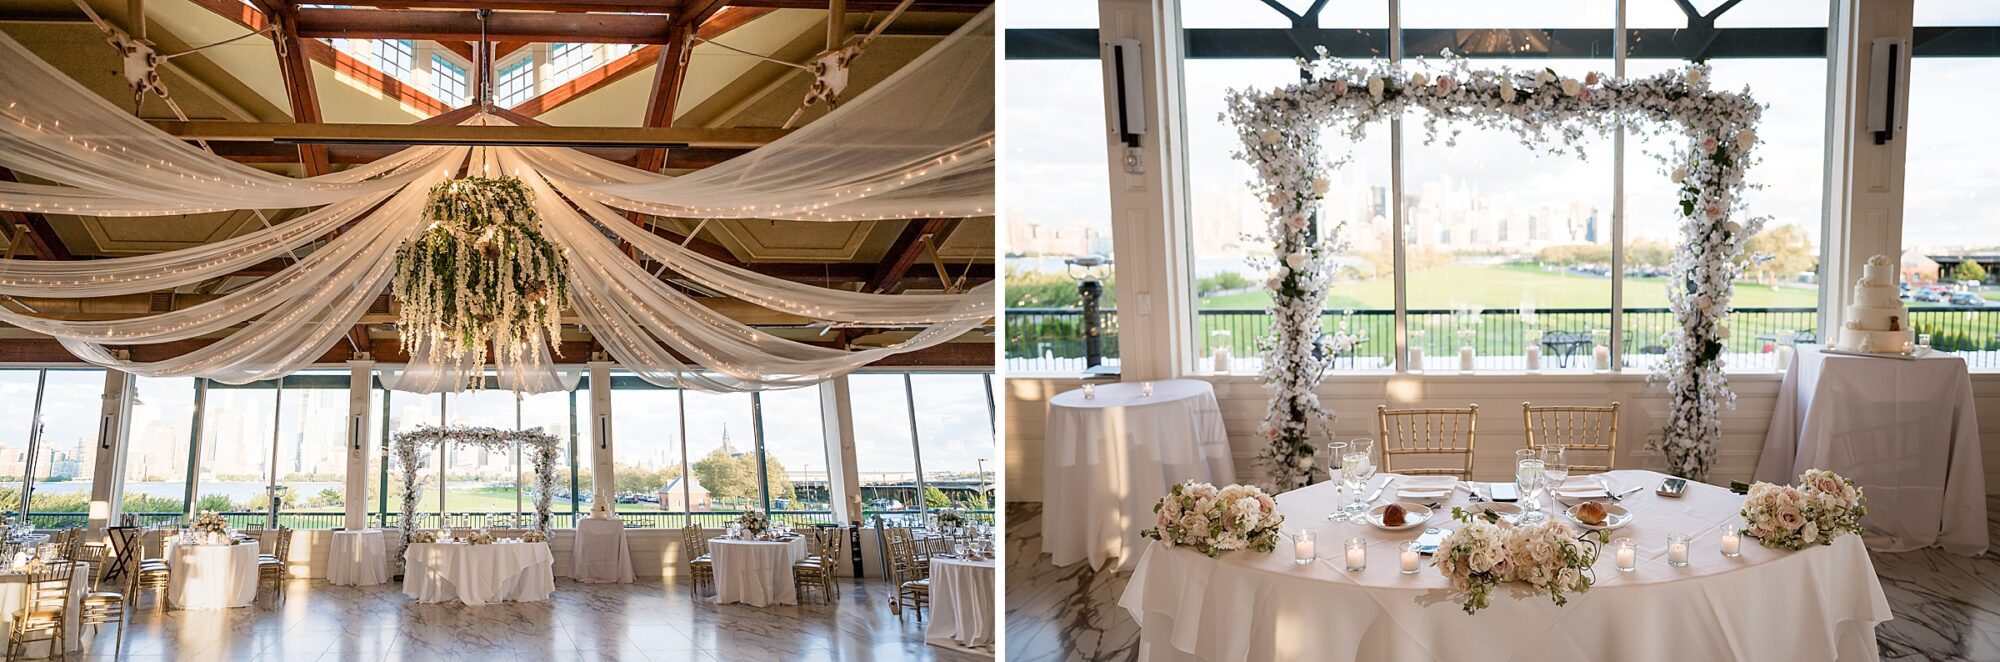 Two pictures of a wedding reception at a lakefront venue.